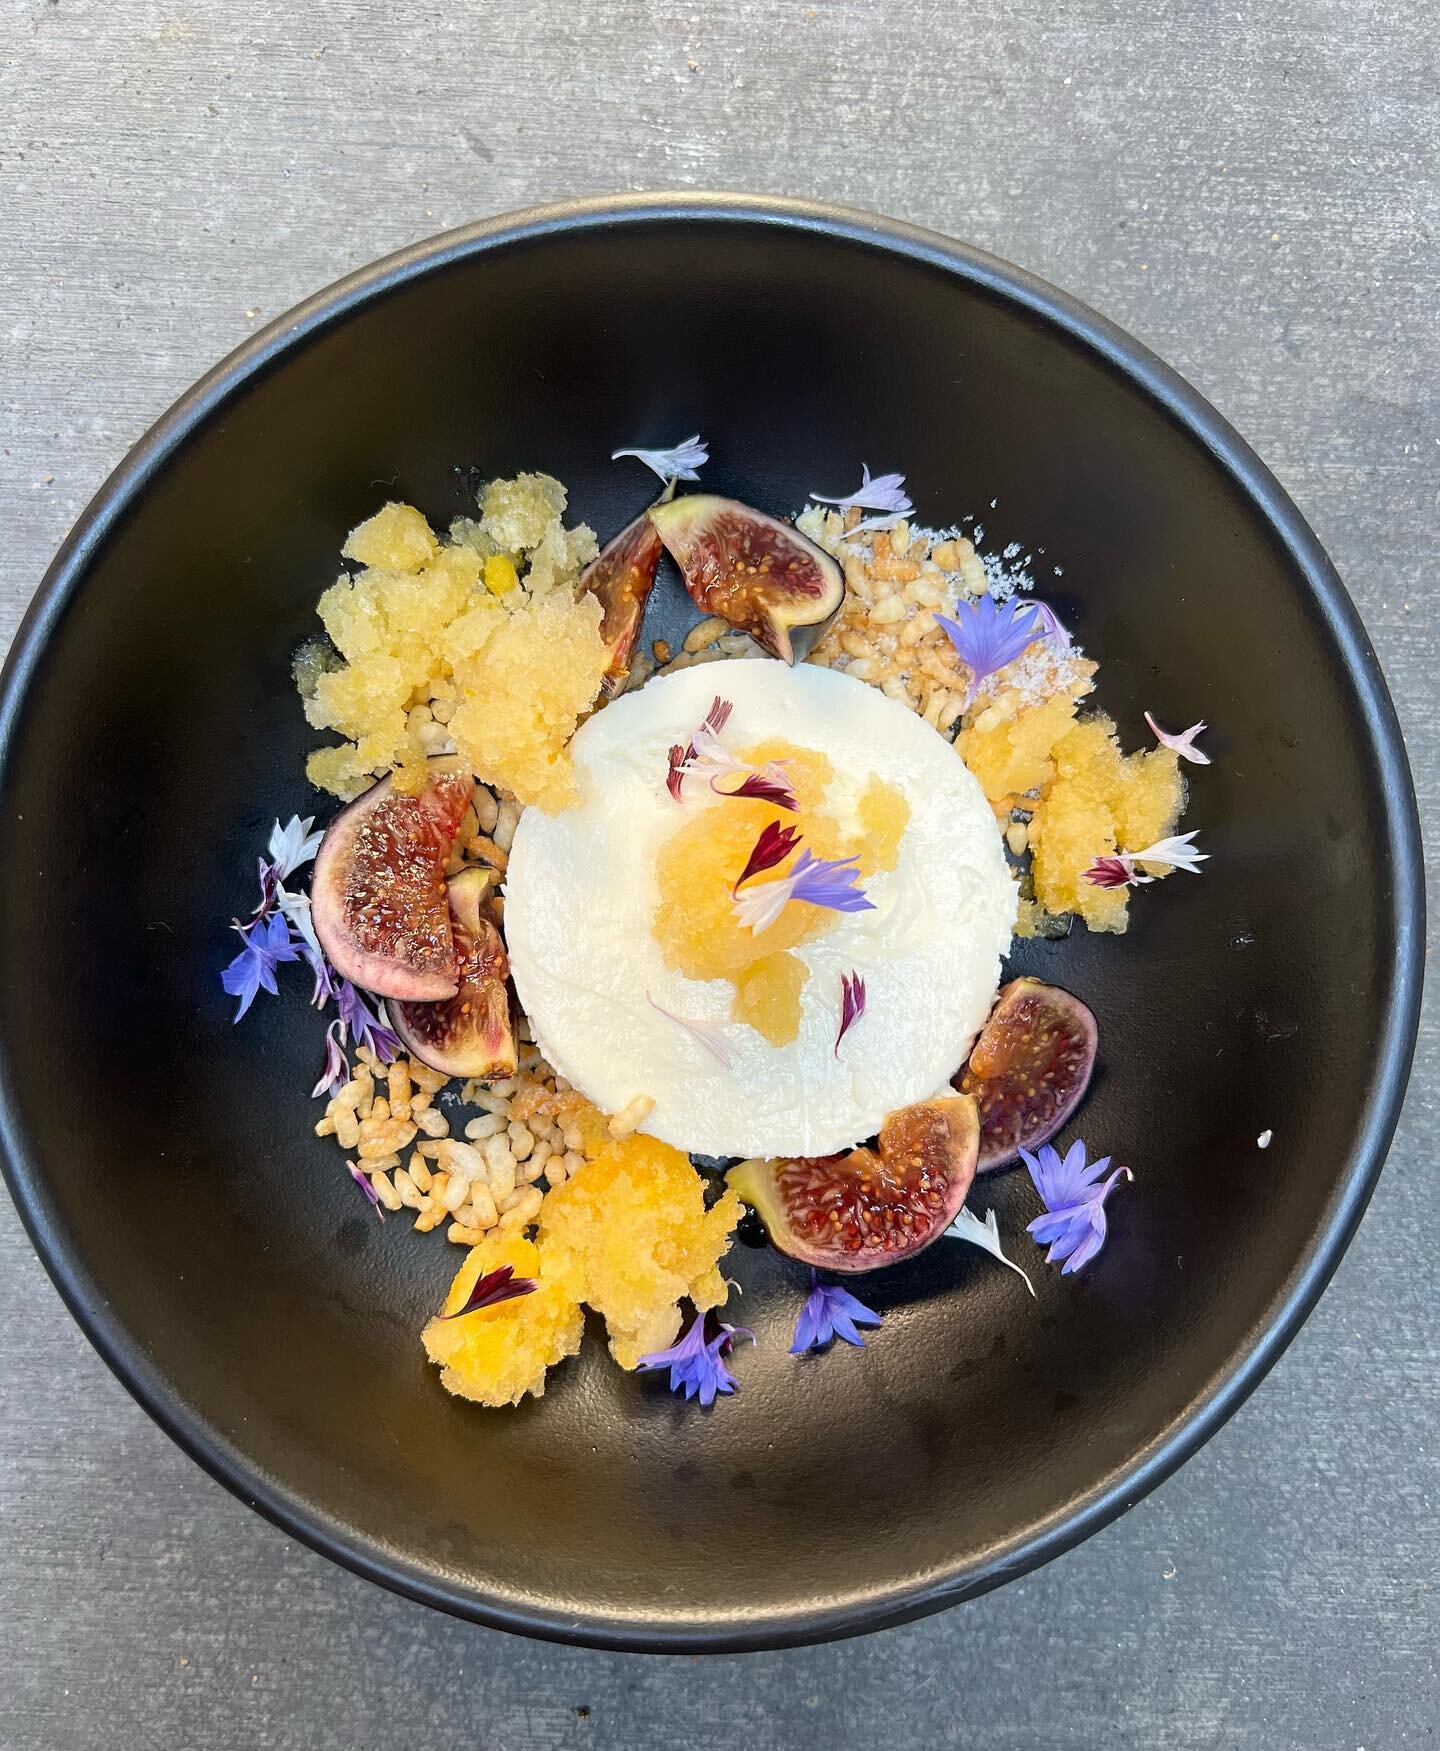 Labne Mousse with citrus granita, puffed rice tossed in vanilla bean sugar, and fresh figs picked from Julie&rsquo;s tree, and @browngirlfarms providing us with all the beauties 💐!